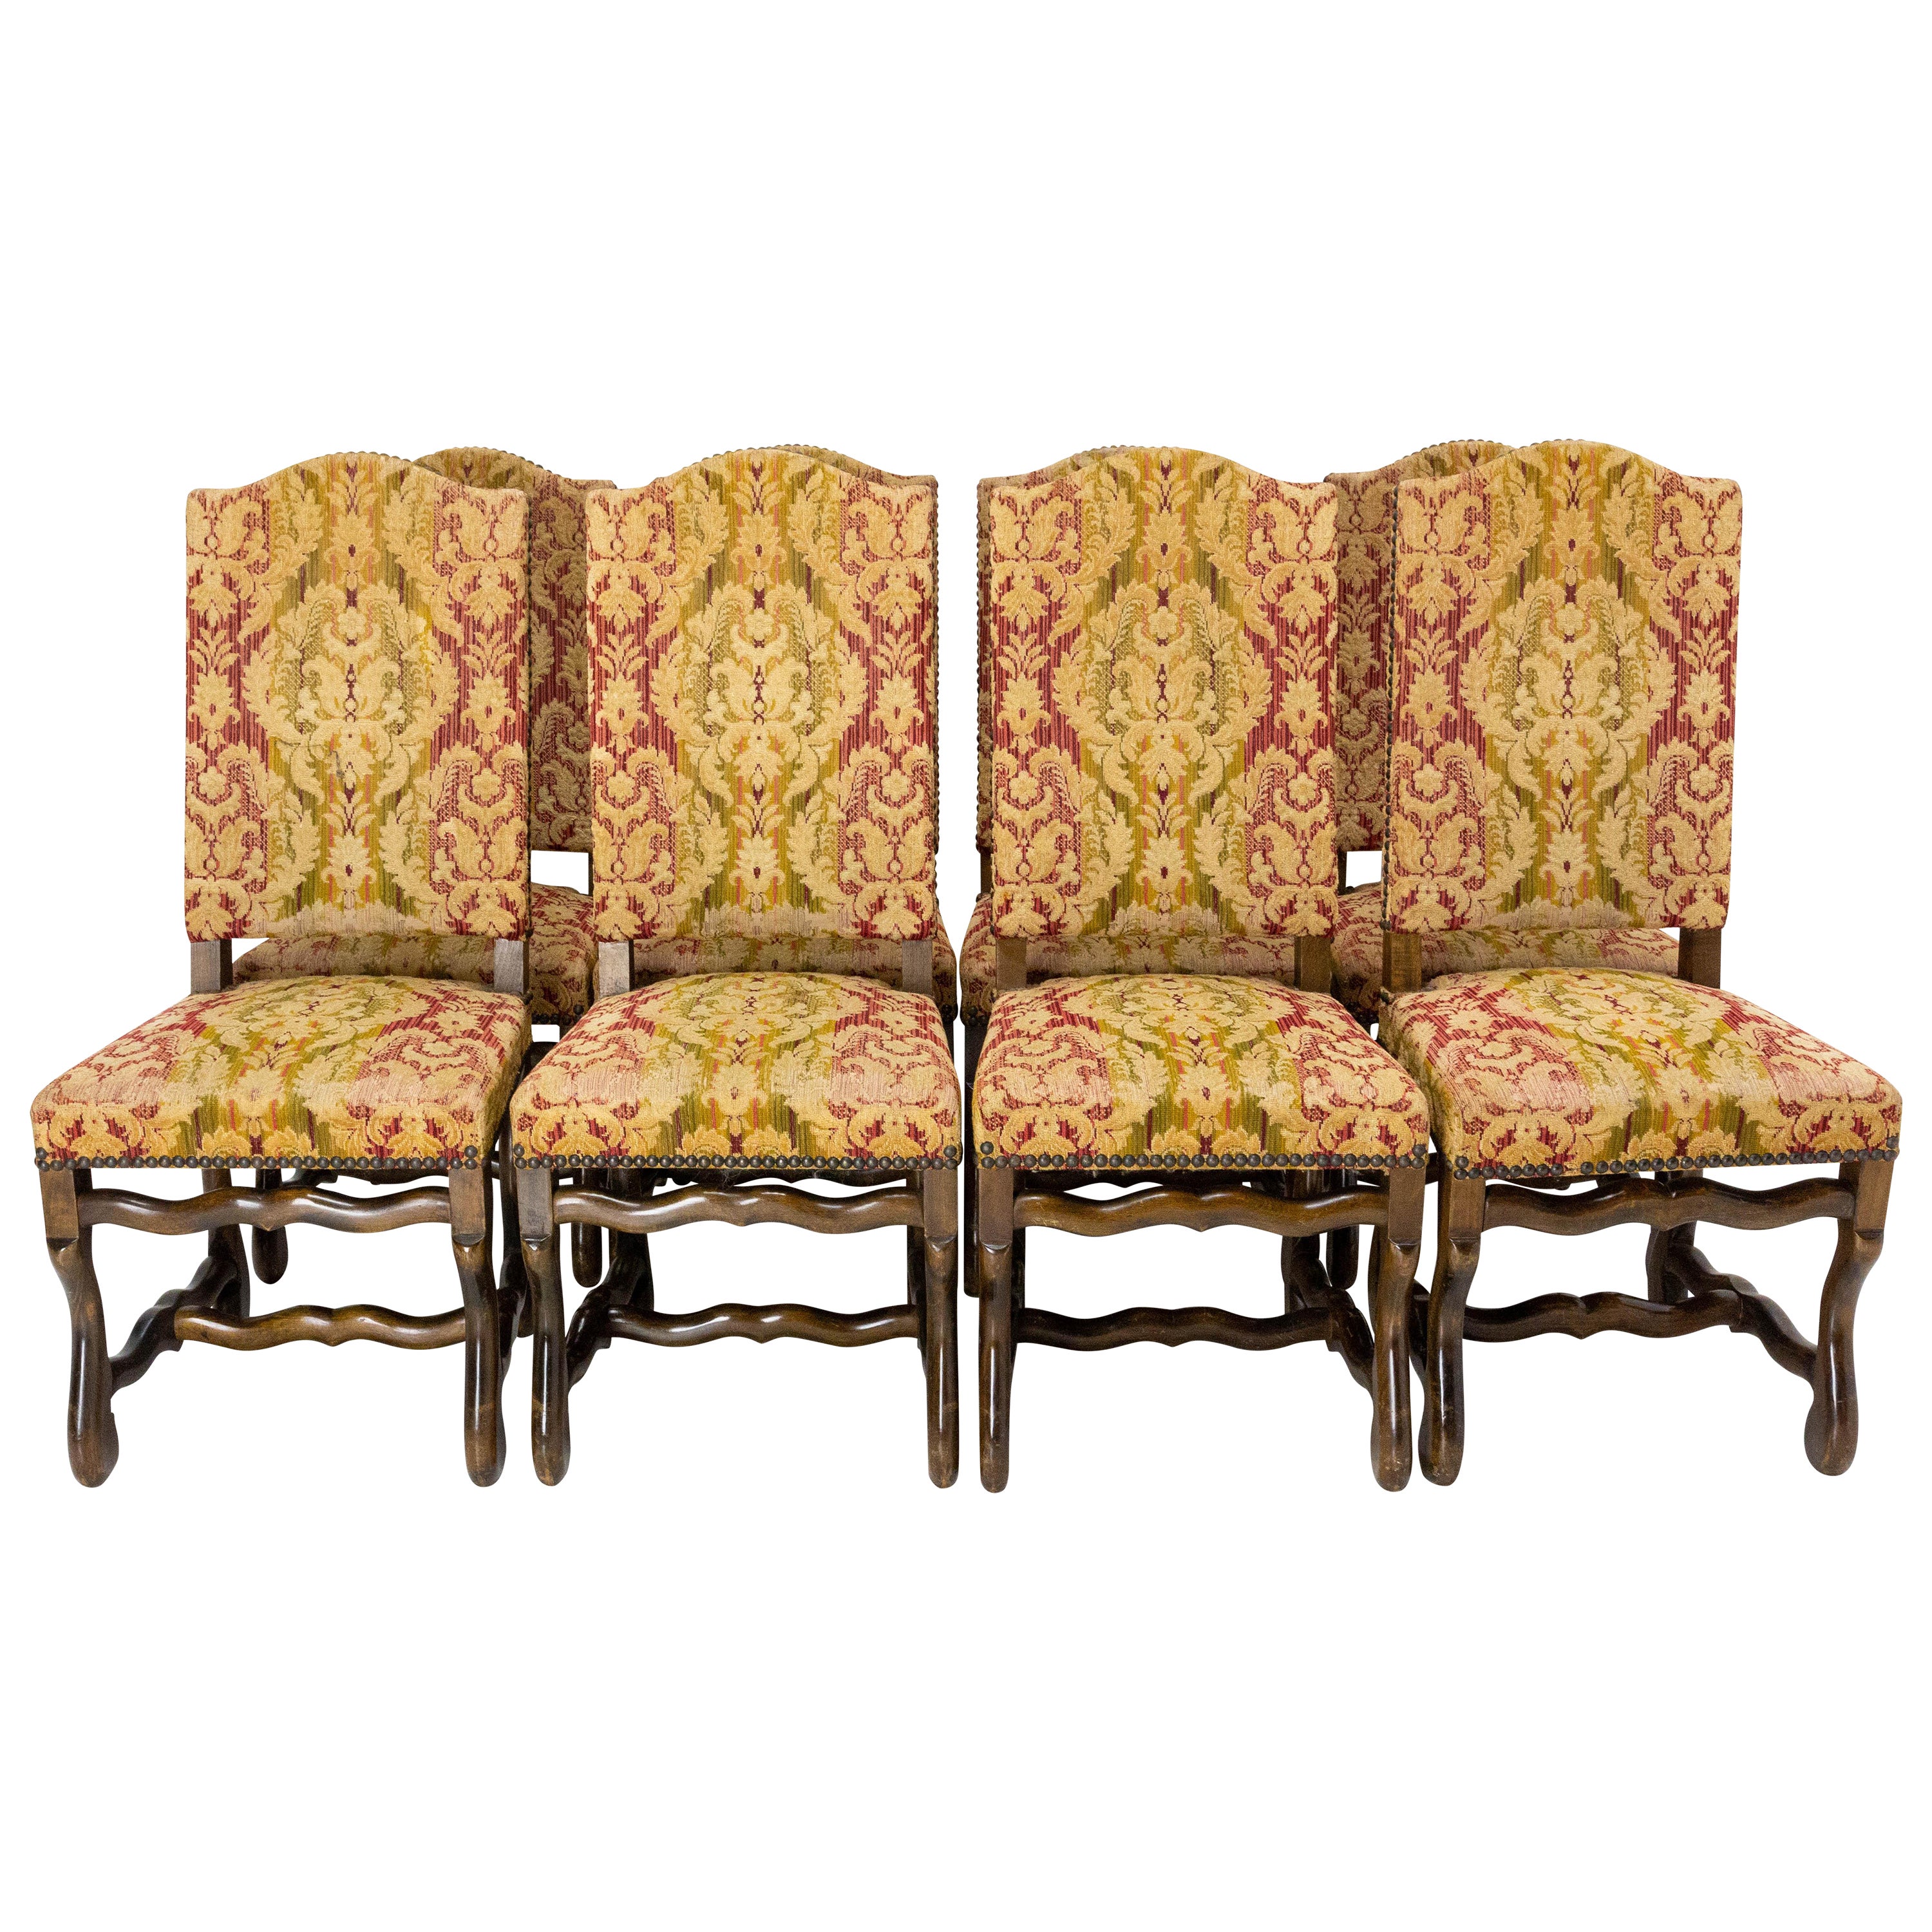 Eight French Dining Chairs Beech Os de Mouton Louis XIII Style, circa 1960 For Sale